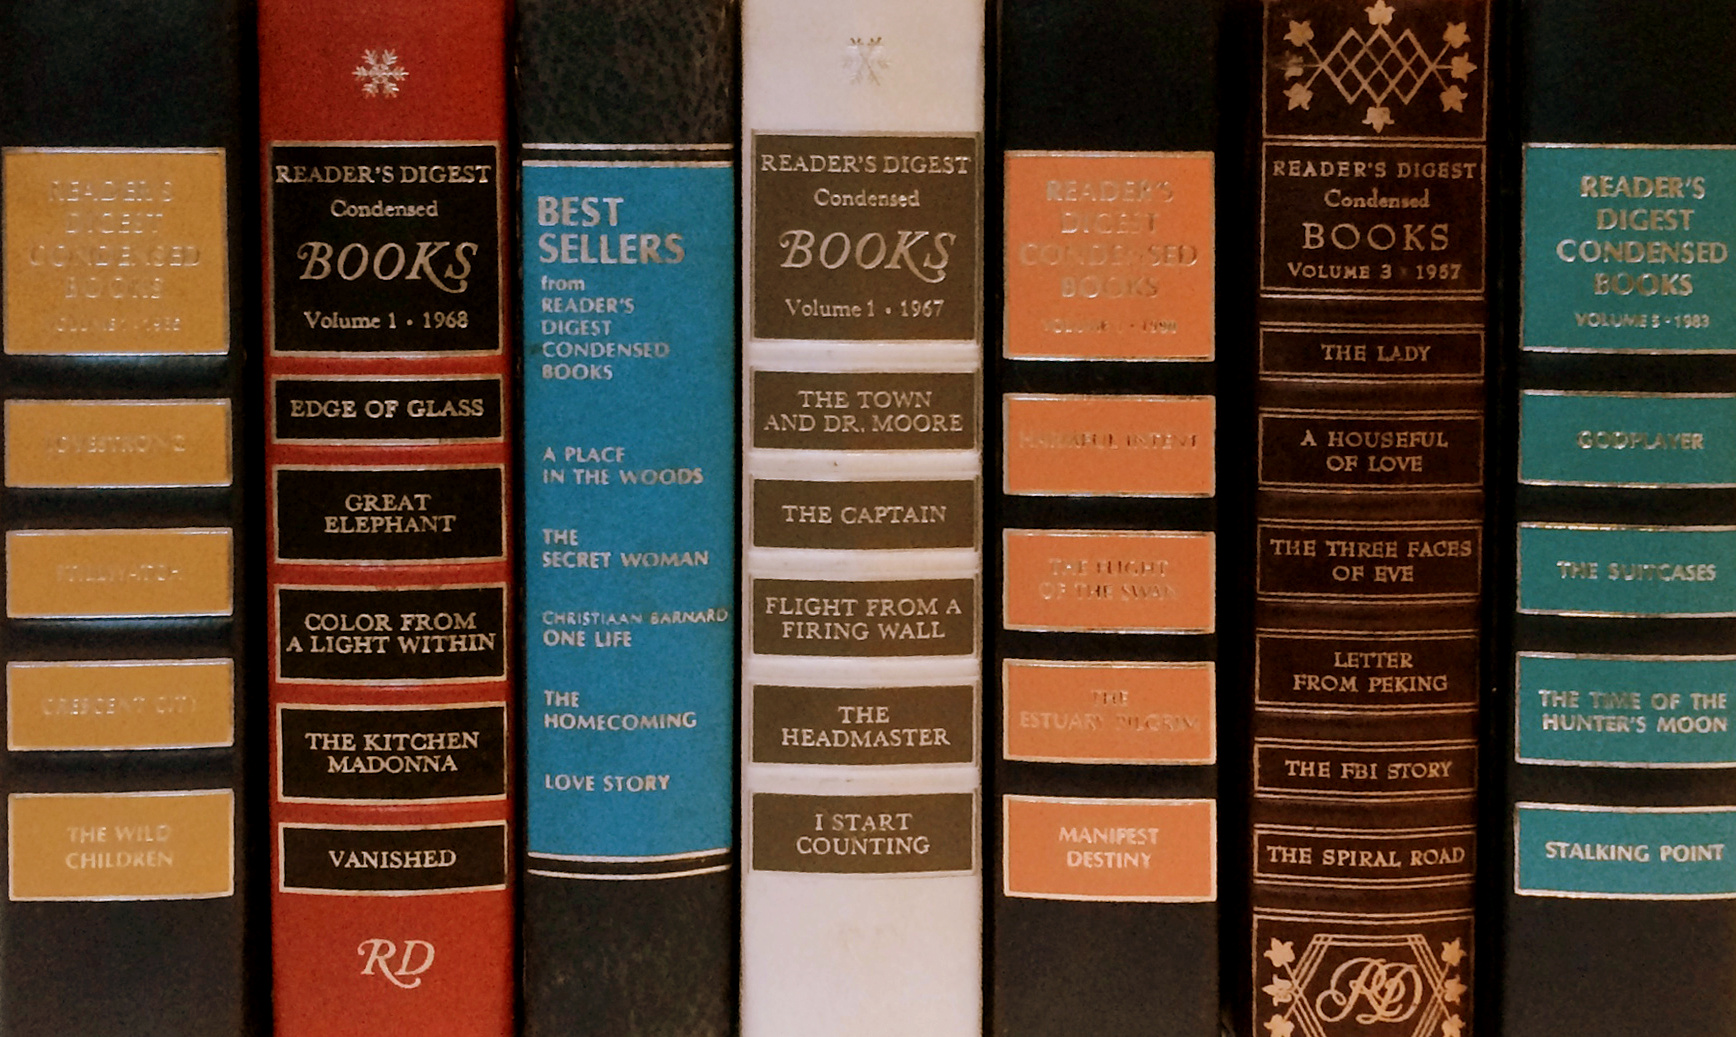 BEHIND THE BLOCK: Why condensed books are worthless, both